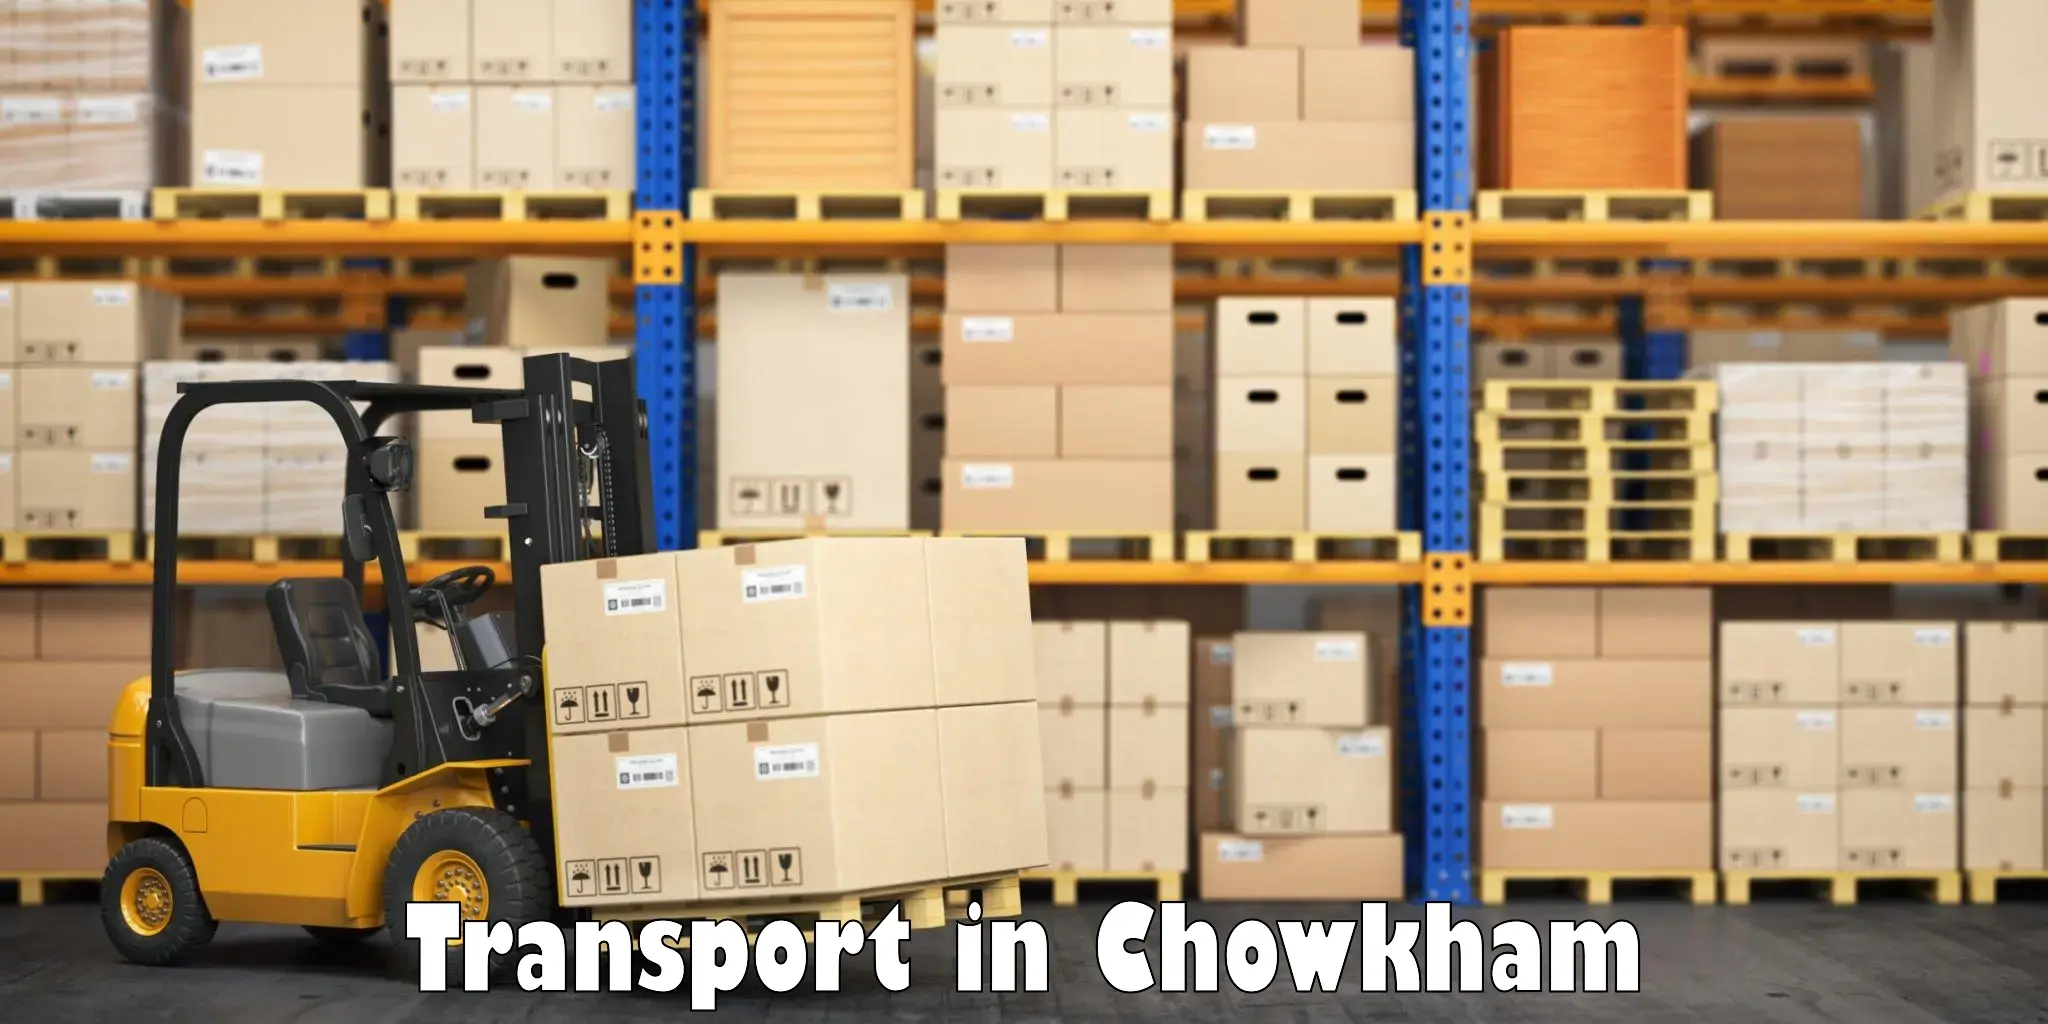 Air freight transport services in Chowkham